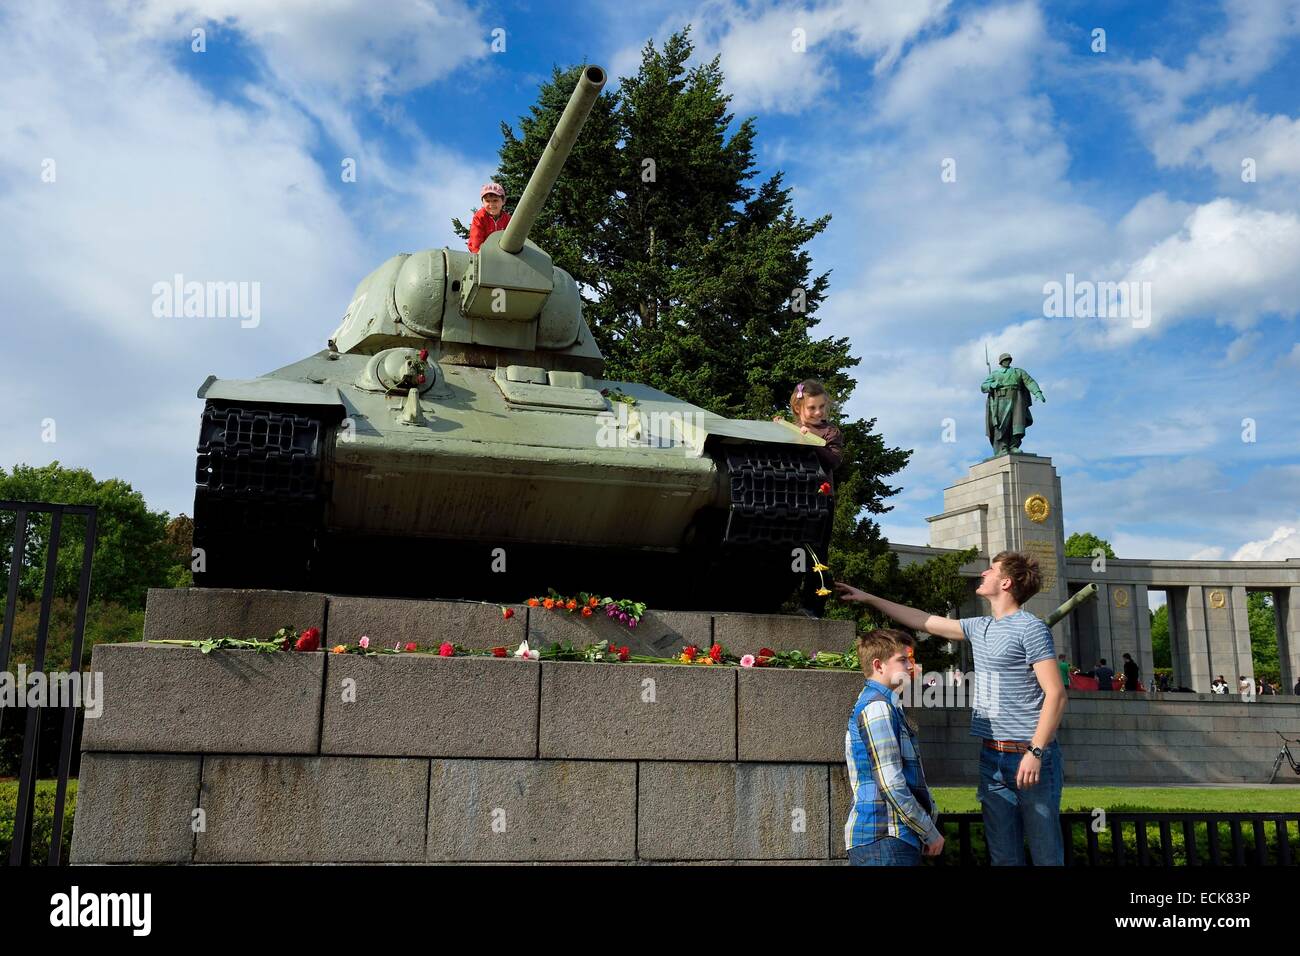 Germany, Berlin, Tiergaten district, Soviet memorial dedicated to the 81,116 soldiers of the Red Army that died during the Battle of Berlin in April-May 1945, annual celebration of the Nazi capitulation May 9, 1945 for Russians Stock Photo